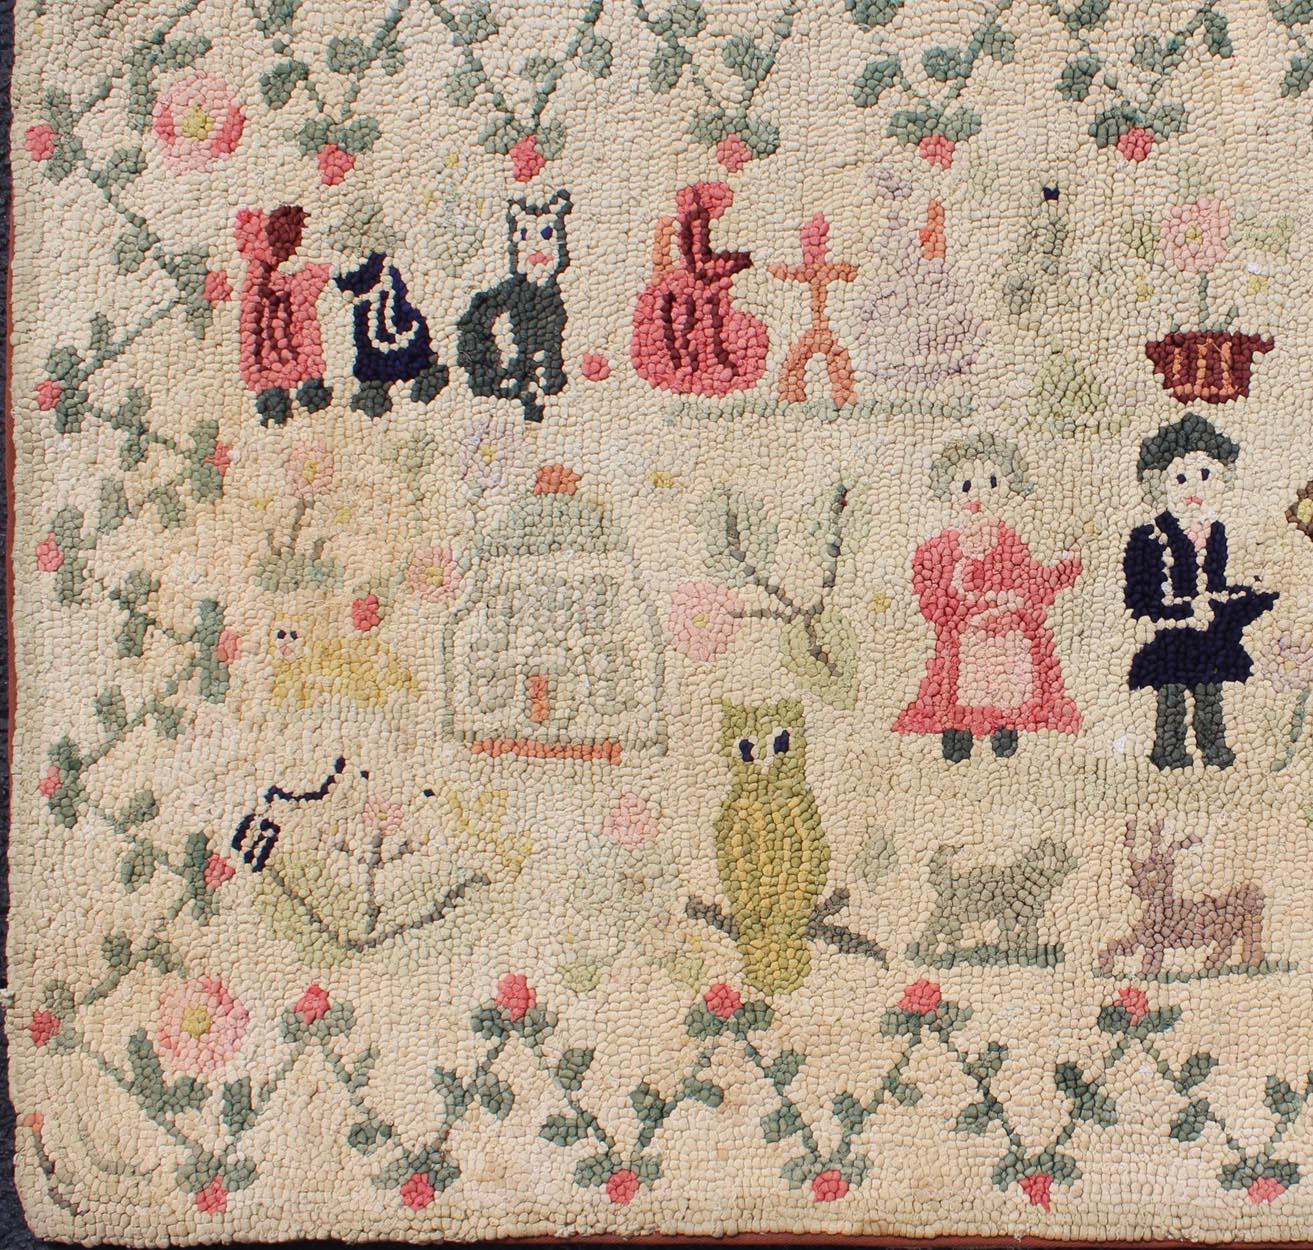 Antique American Hooked rug featuring colorful pictorial village scene, rug s12-0806, country of origin / type: United States / Hooked, circa 1920

This American Hooked rug depicts a colorful village scene, including various people, an owl,